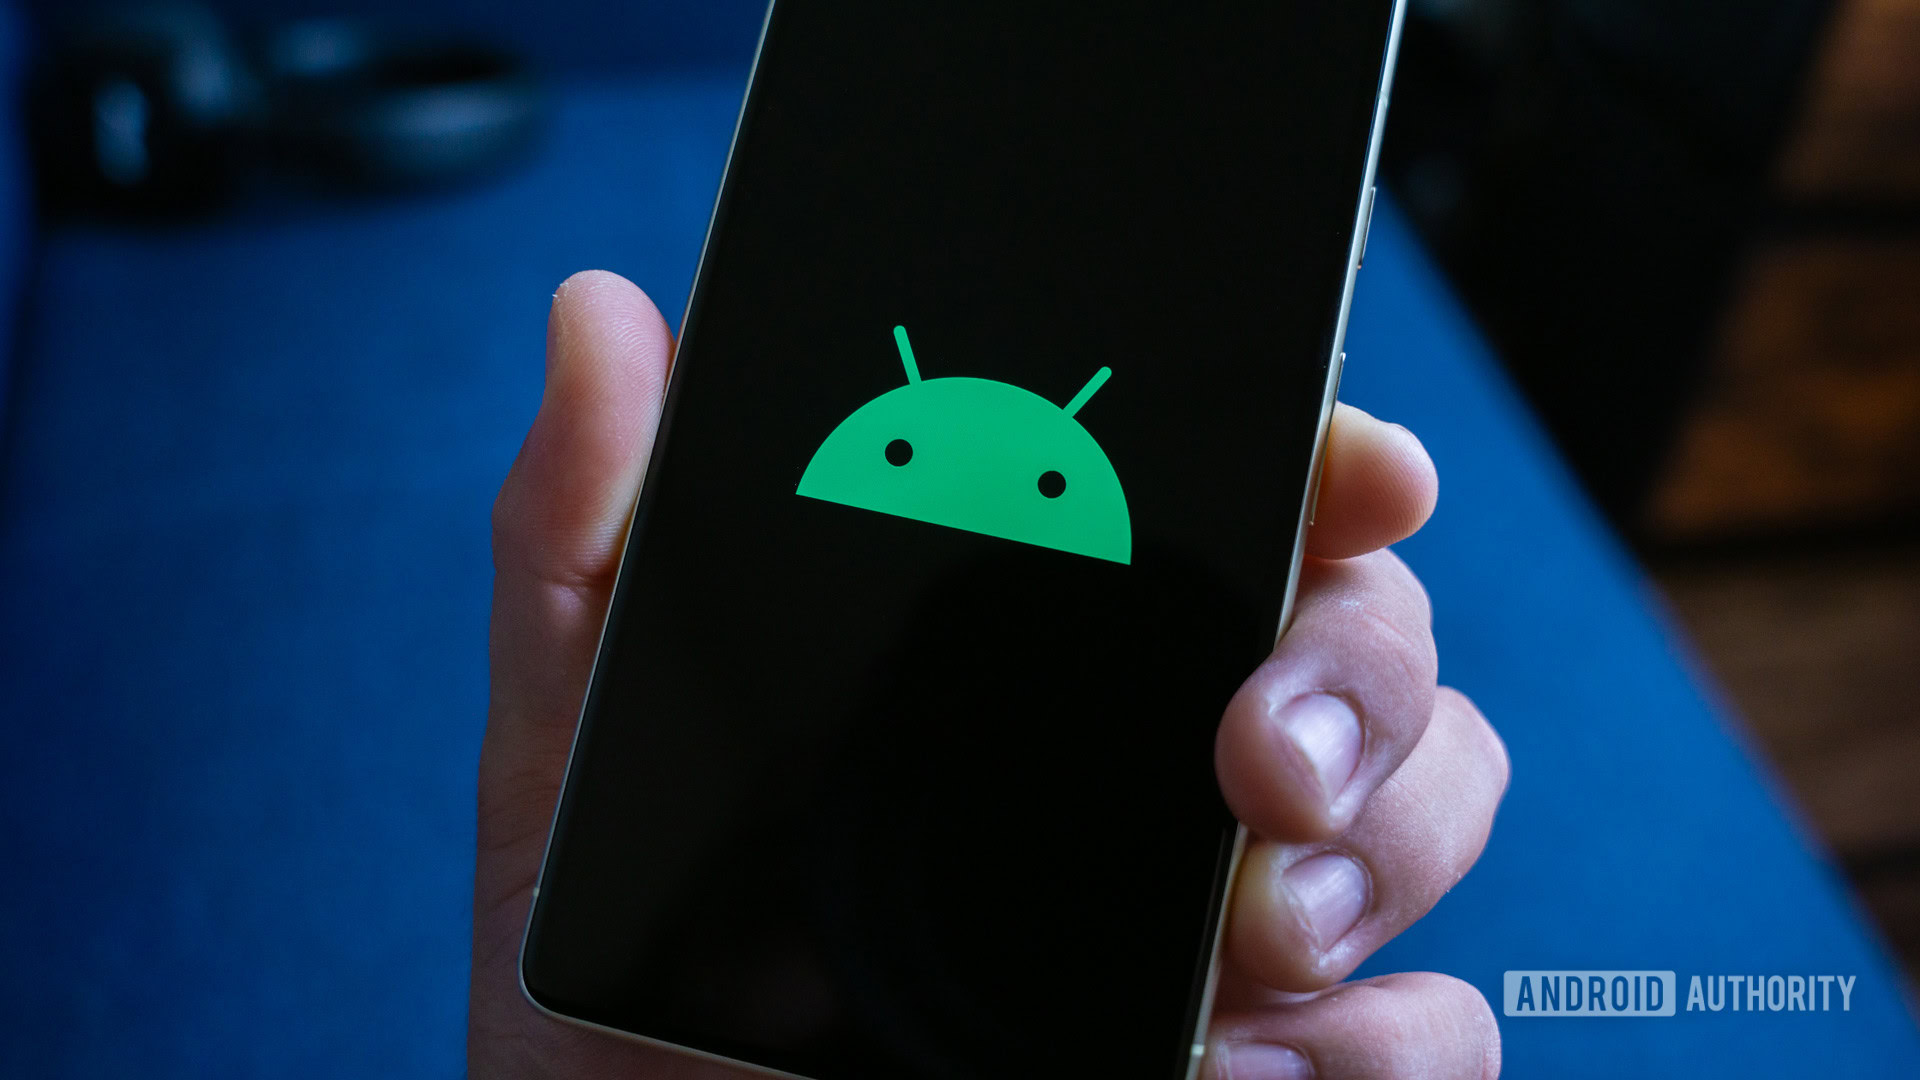 Android logo on smartphone stock photo (11)